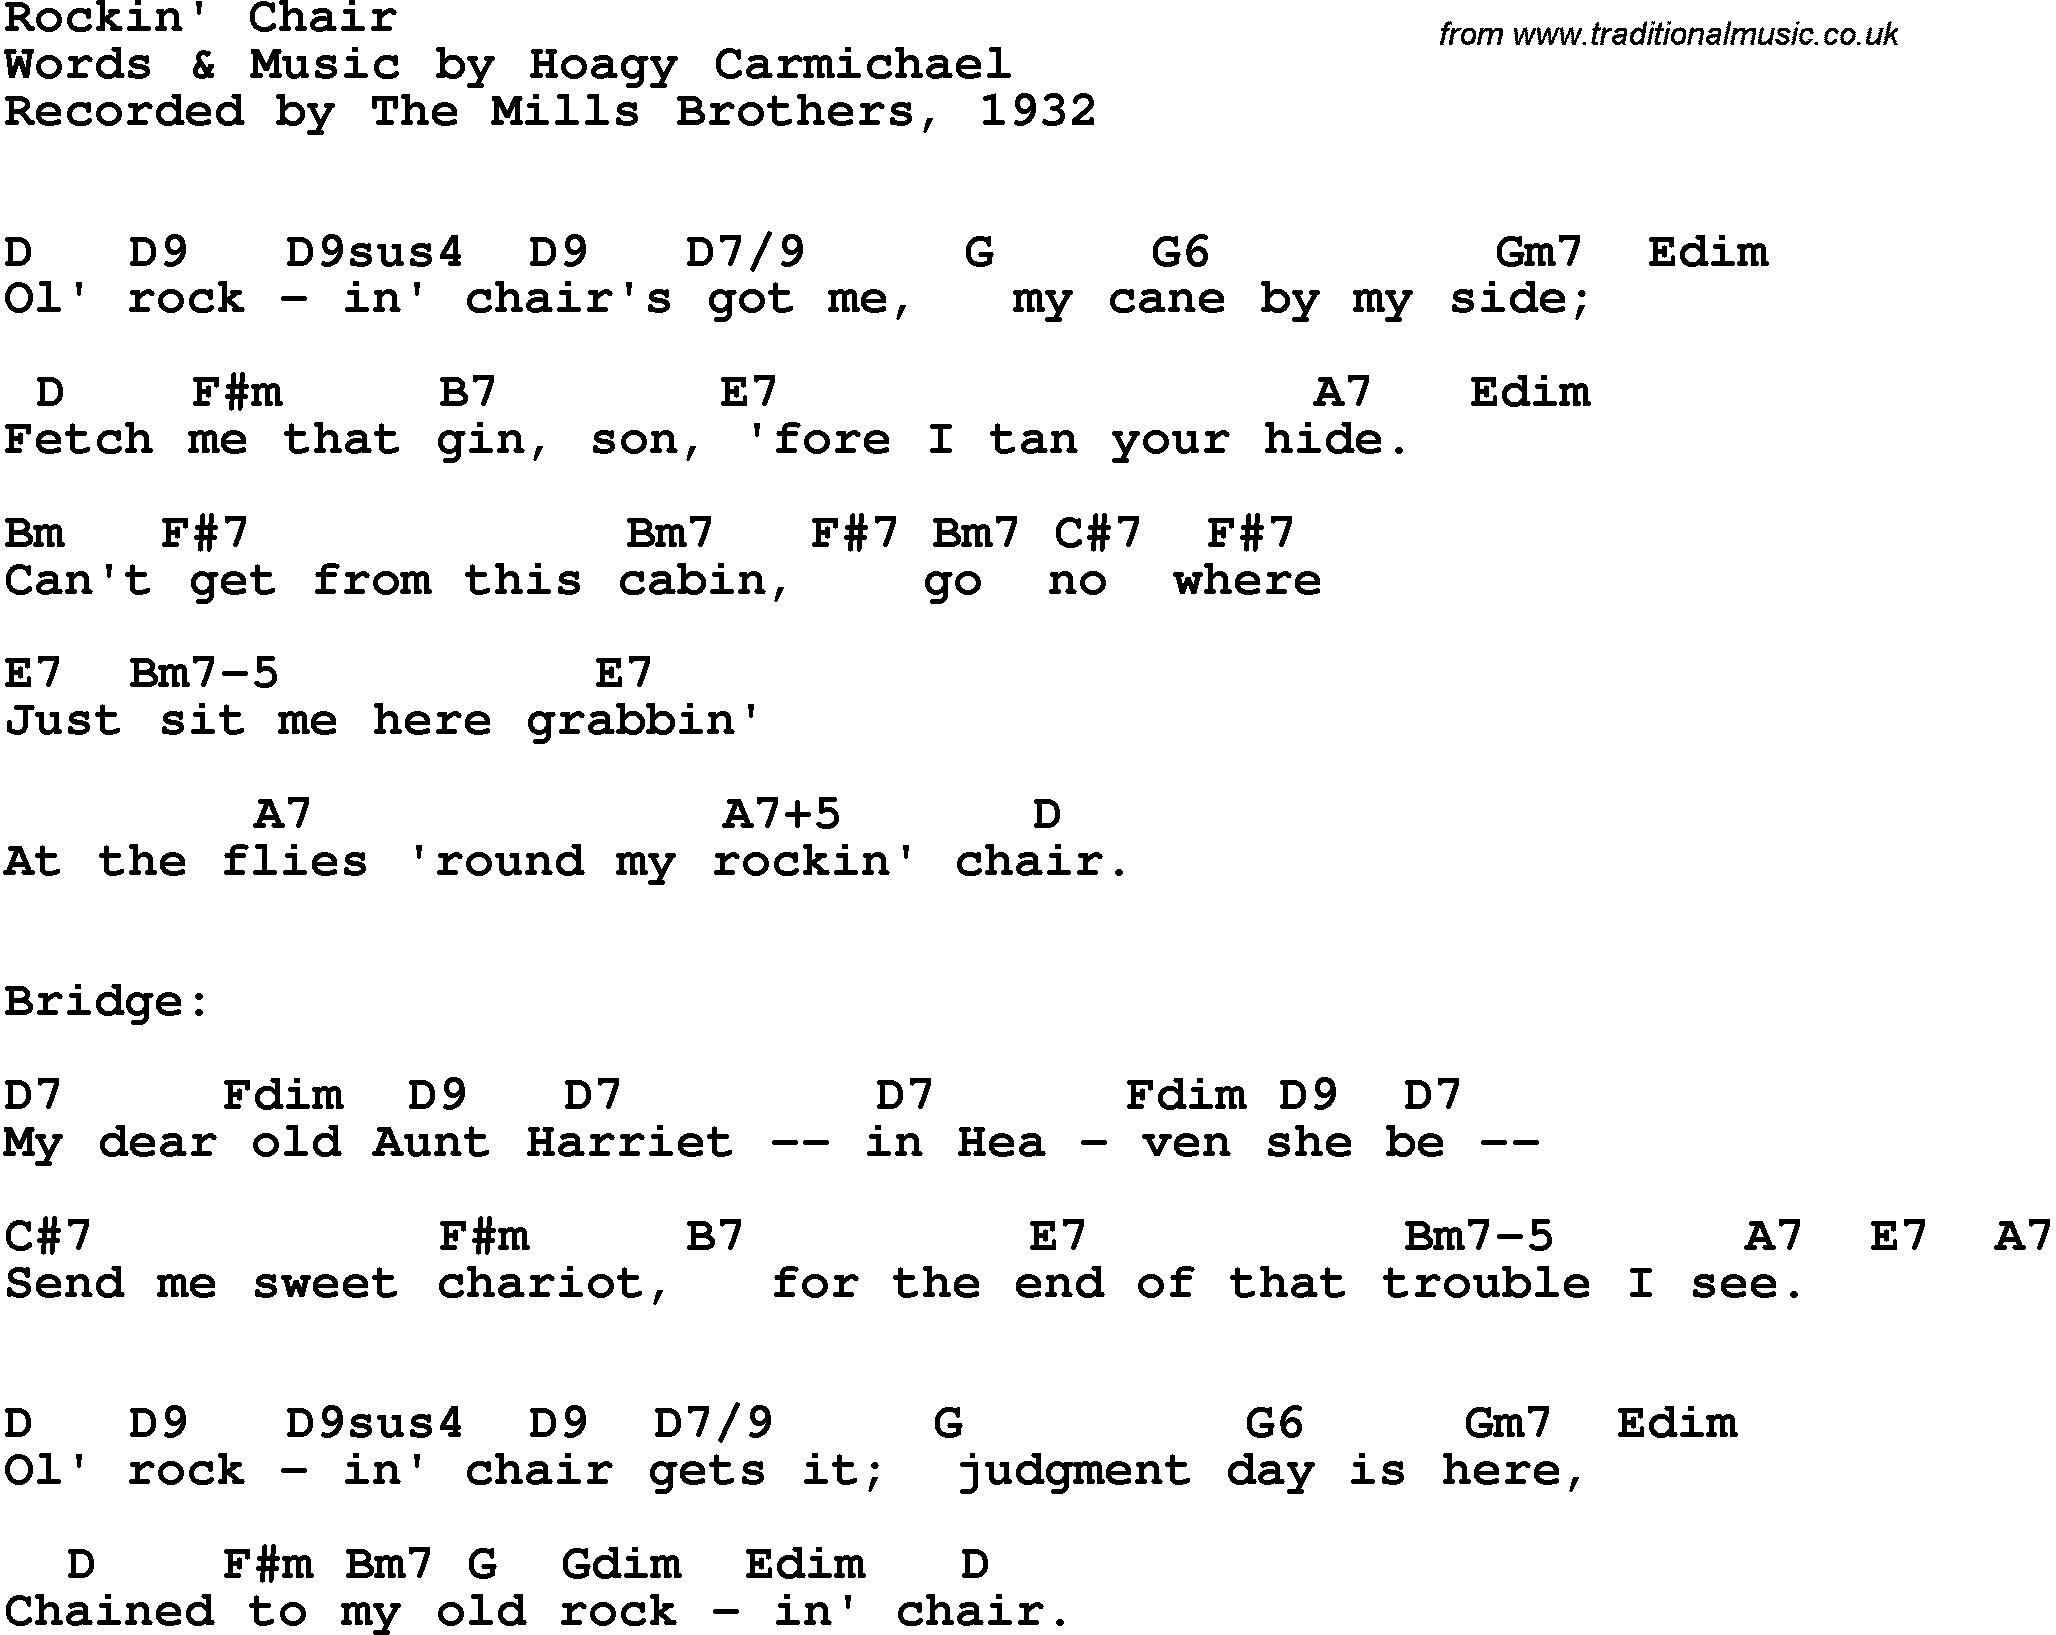 Song Lyrics with guitar chords for Rockin' Chair - The Mills Brothers, 1932